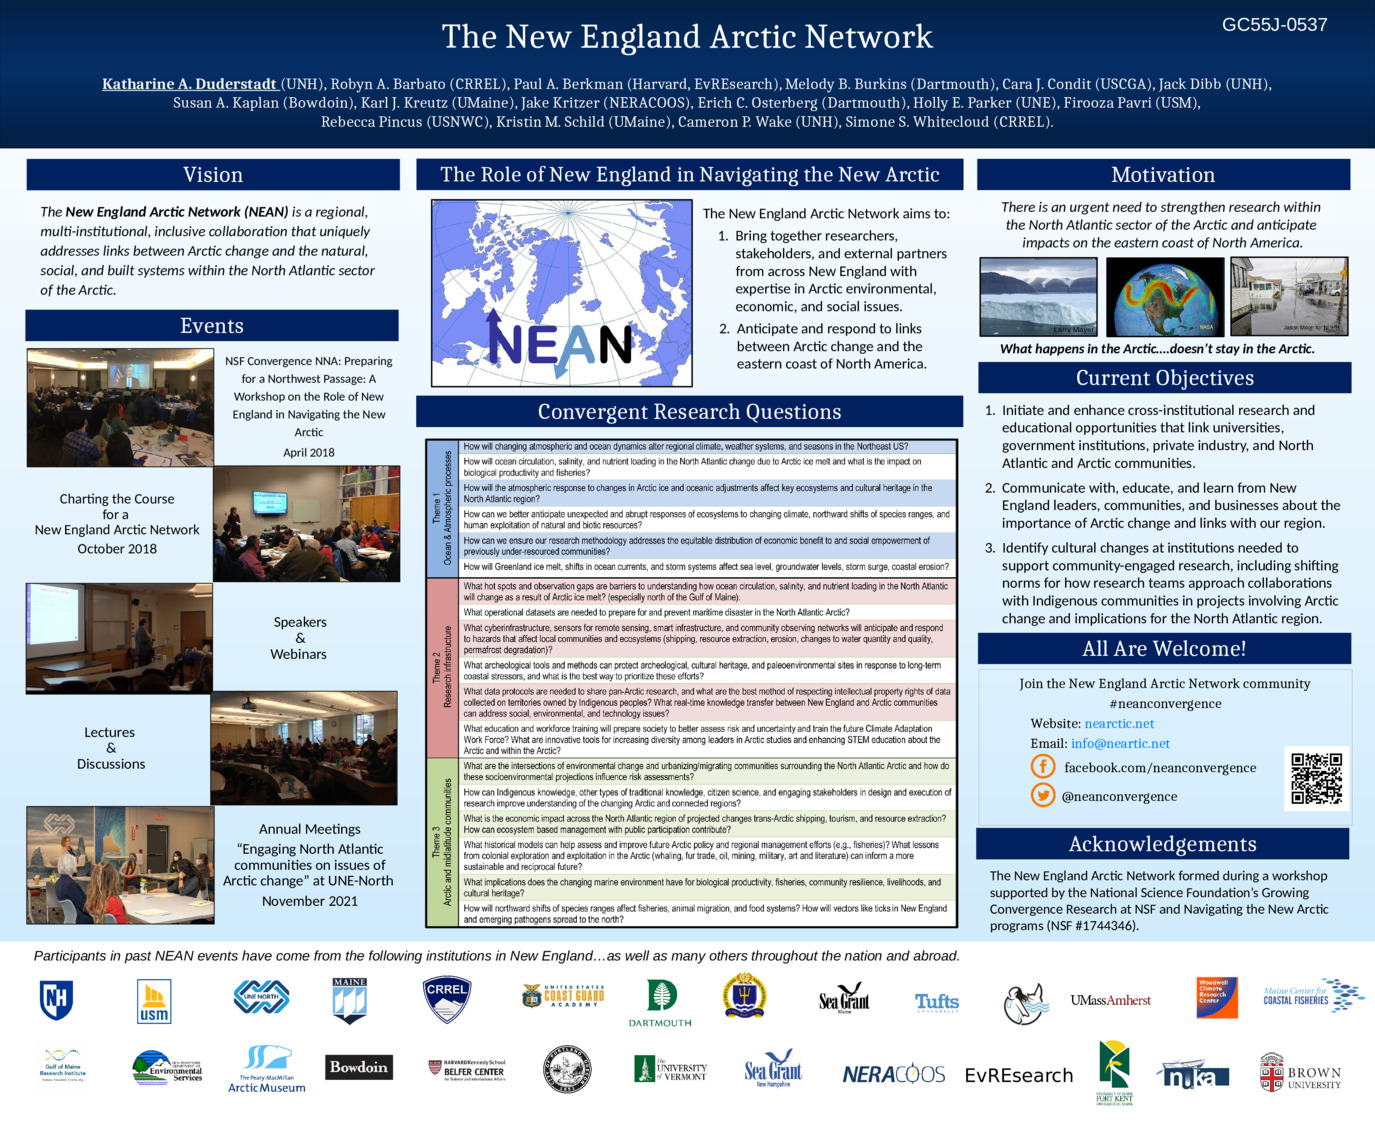 The New England Arctic Network by duderstadtk